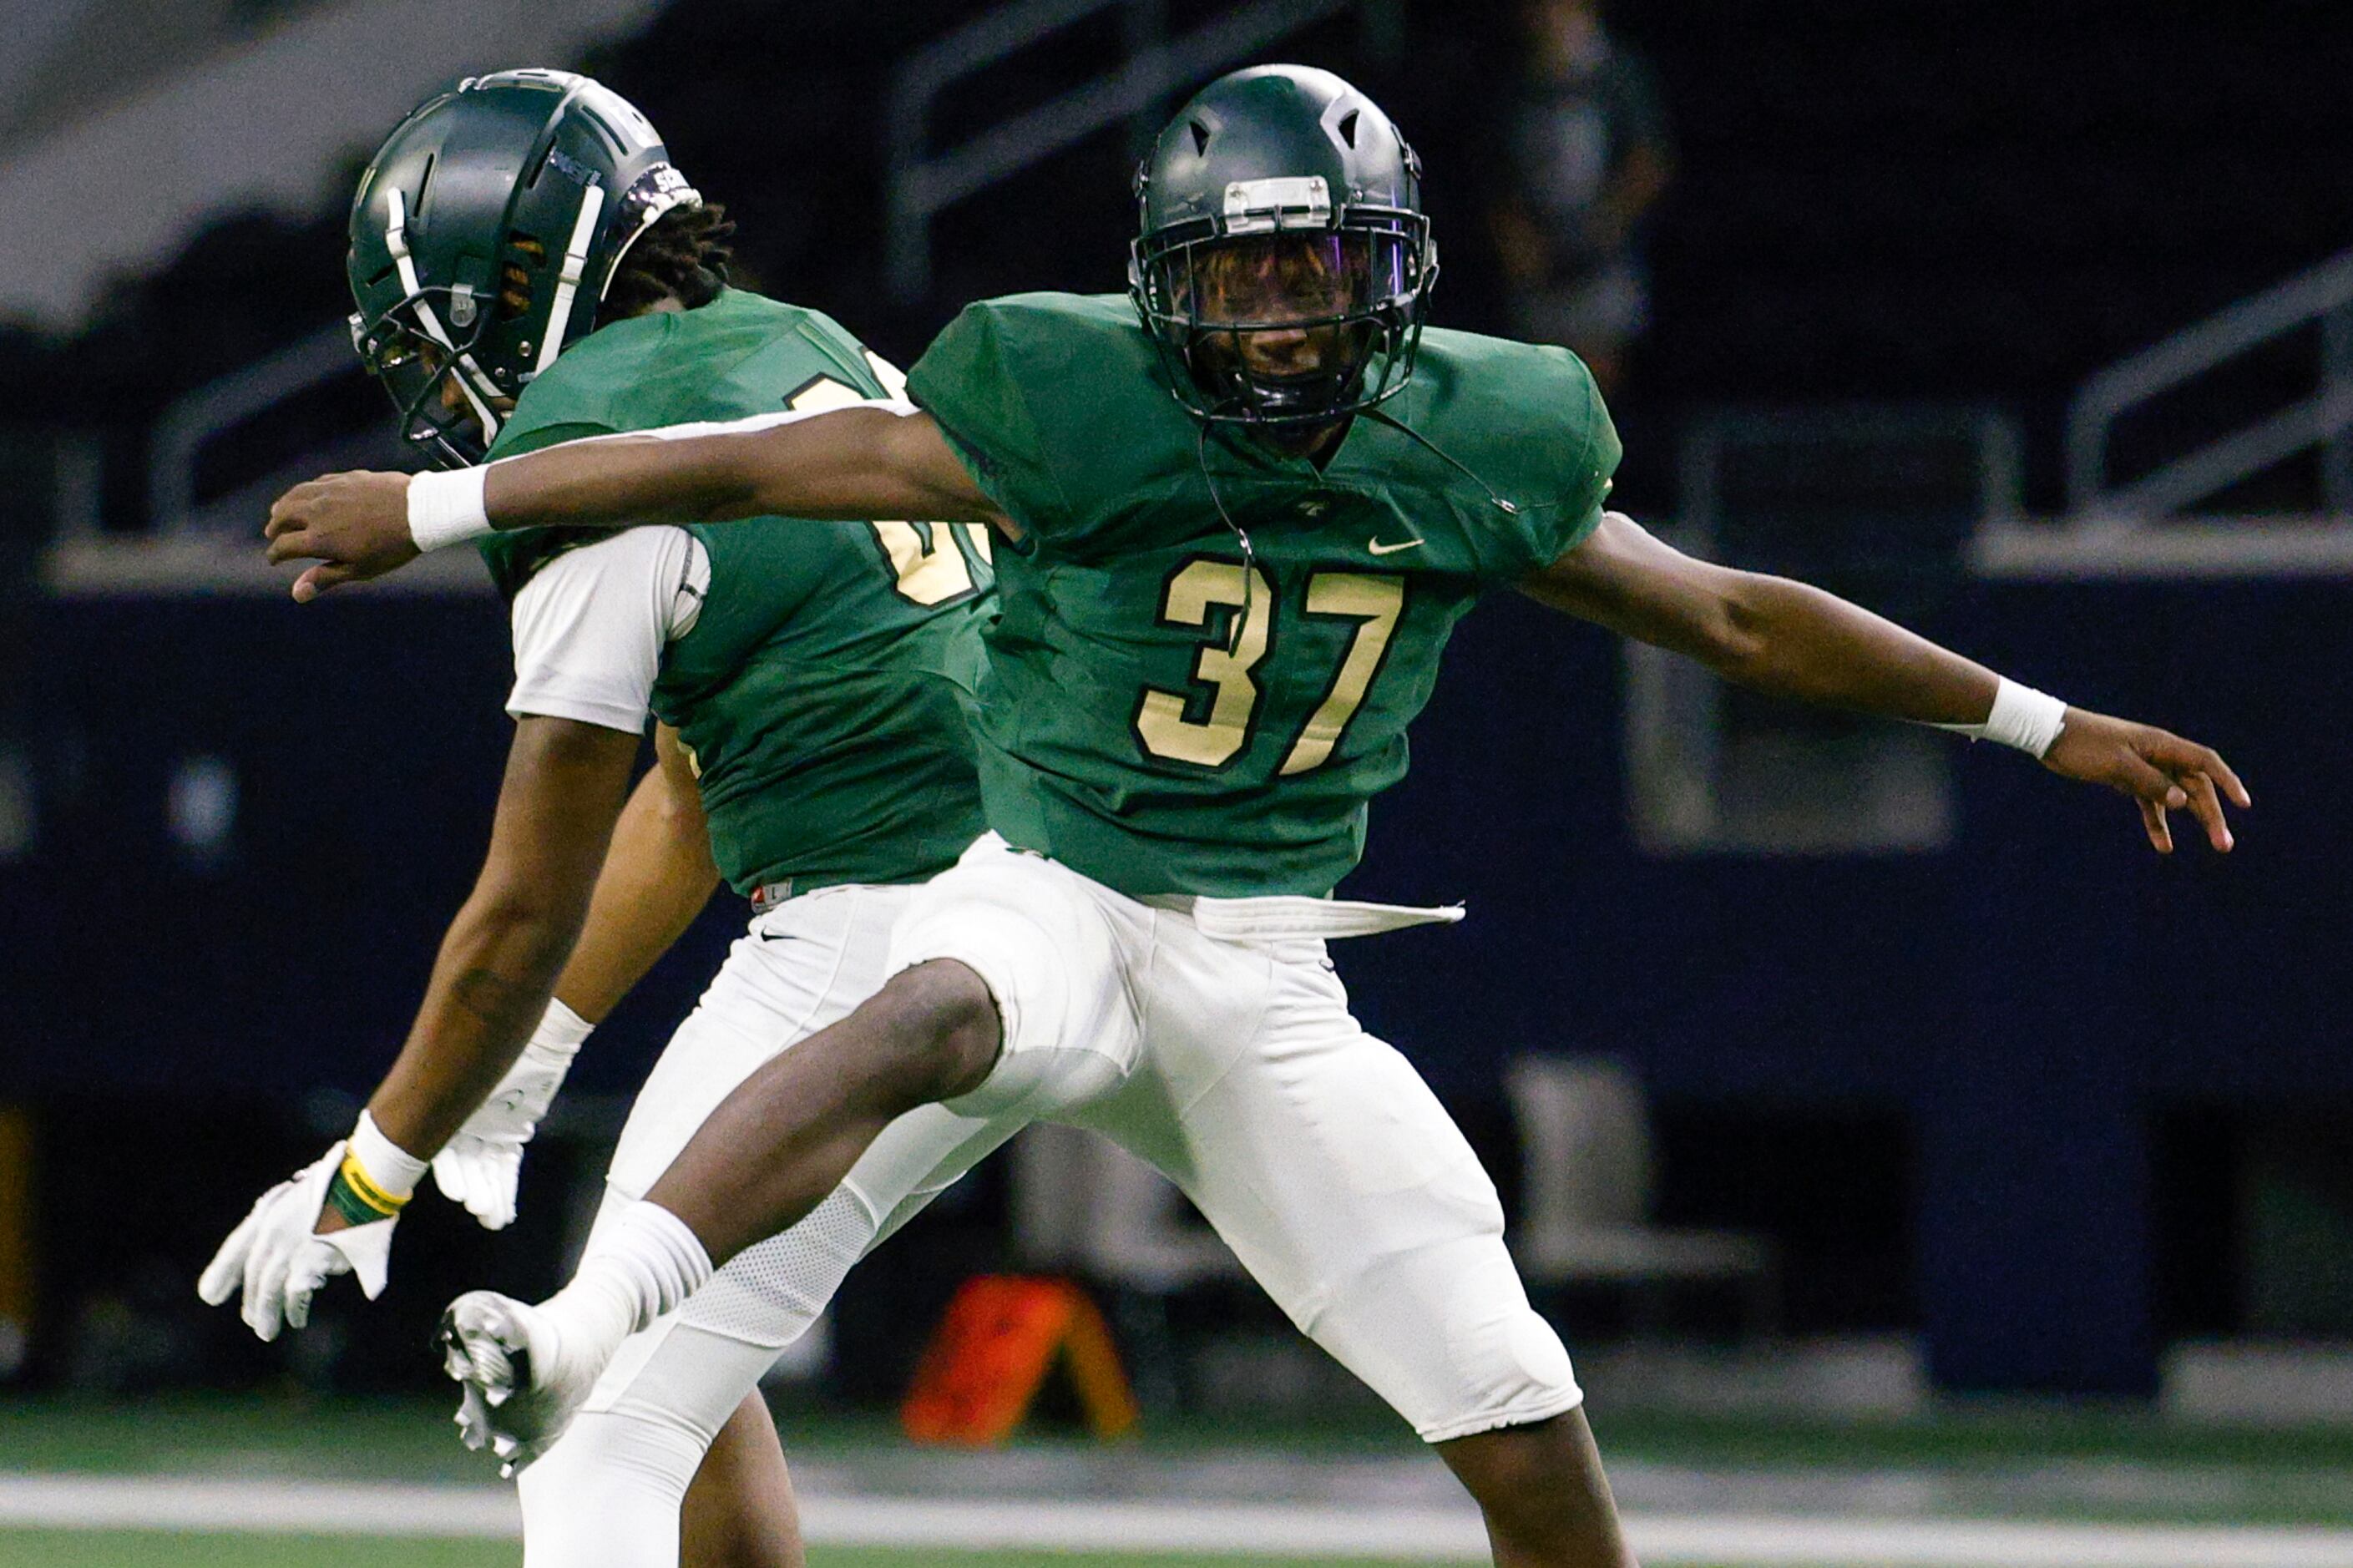 DeSoto’s Aundre Wisner (37) celebrates a touchdown after a blocked punt with Dahlyn Jones...